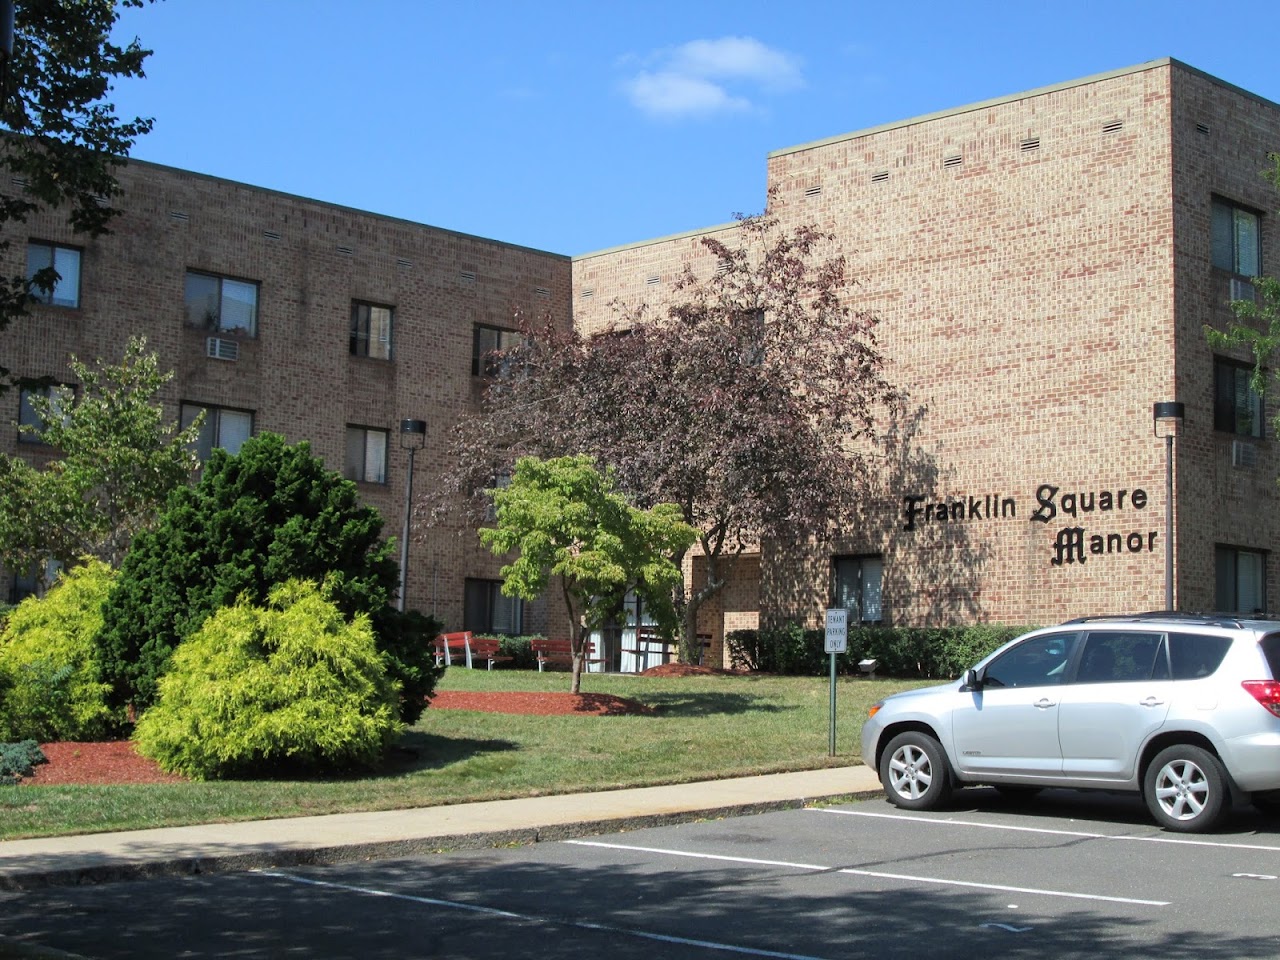 Photo of DEVCON FRANKLIN SQUARE MANOR. Affordable housing located at 120 WHITING ST NEW BRITAIN, CT 06051